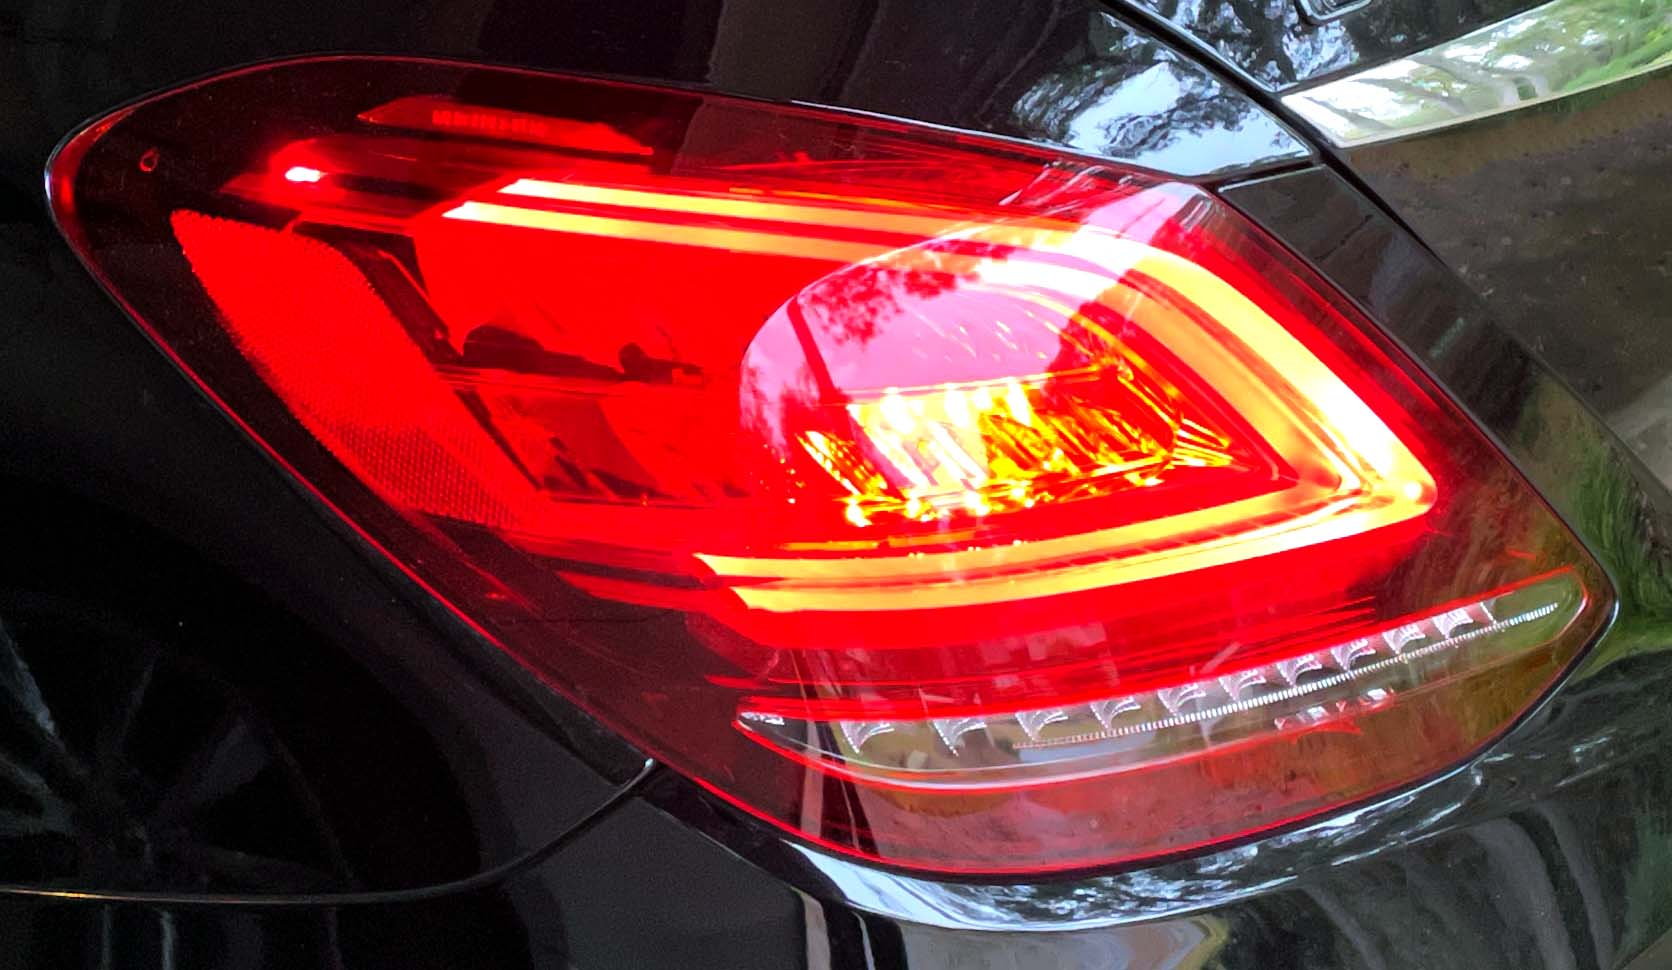 Replace a rear light on Mercedes Classe A W176 and change the